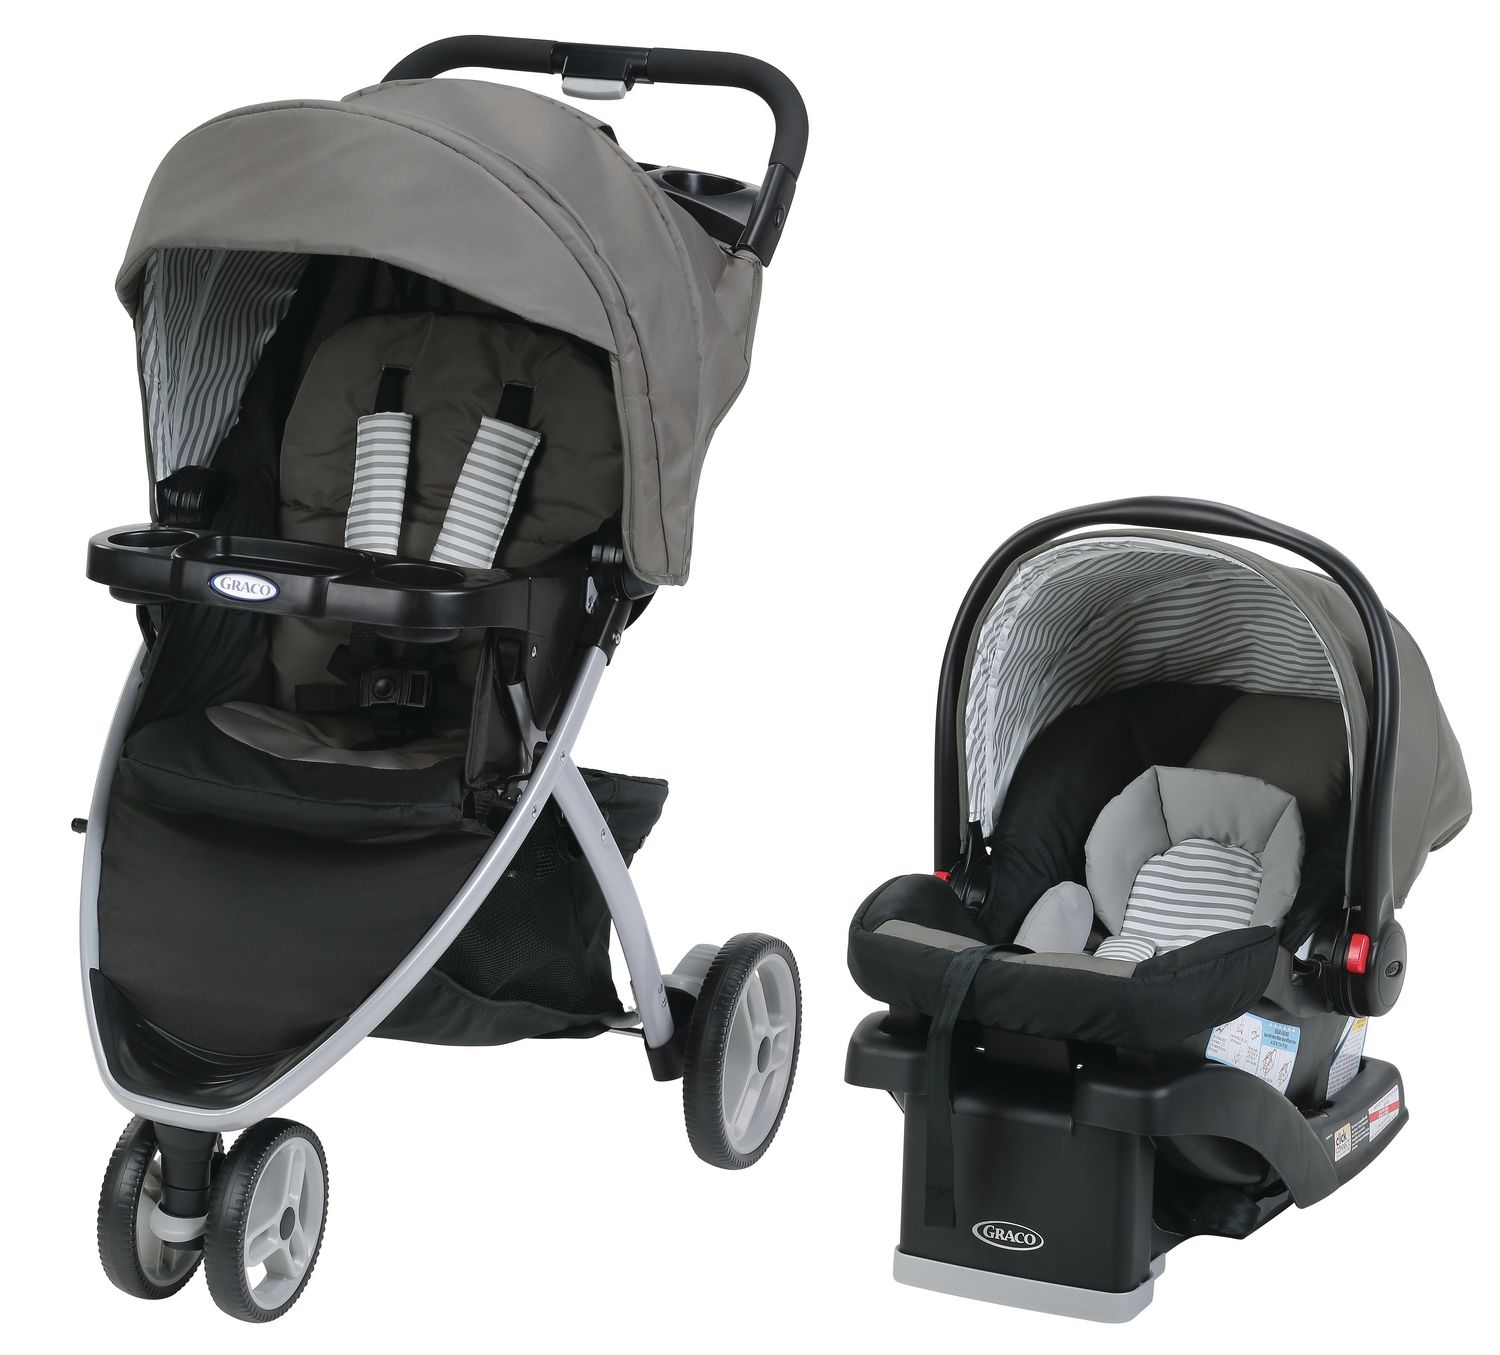 Graco Pace Travel System | Walmart Canada